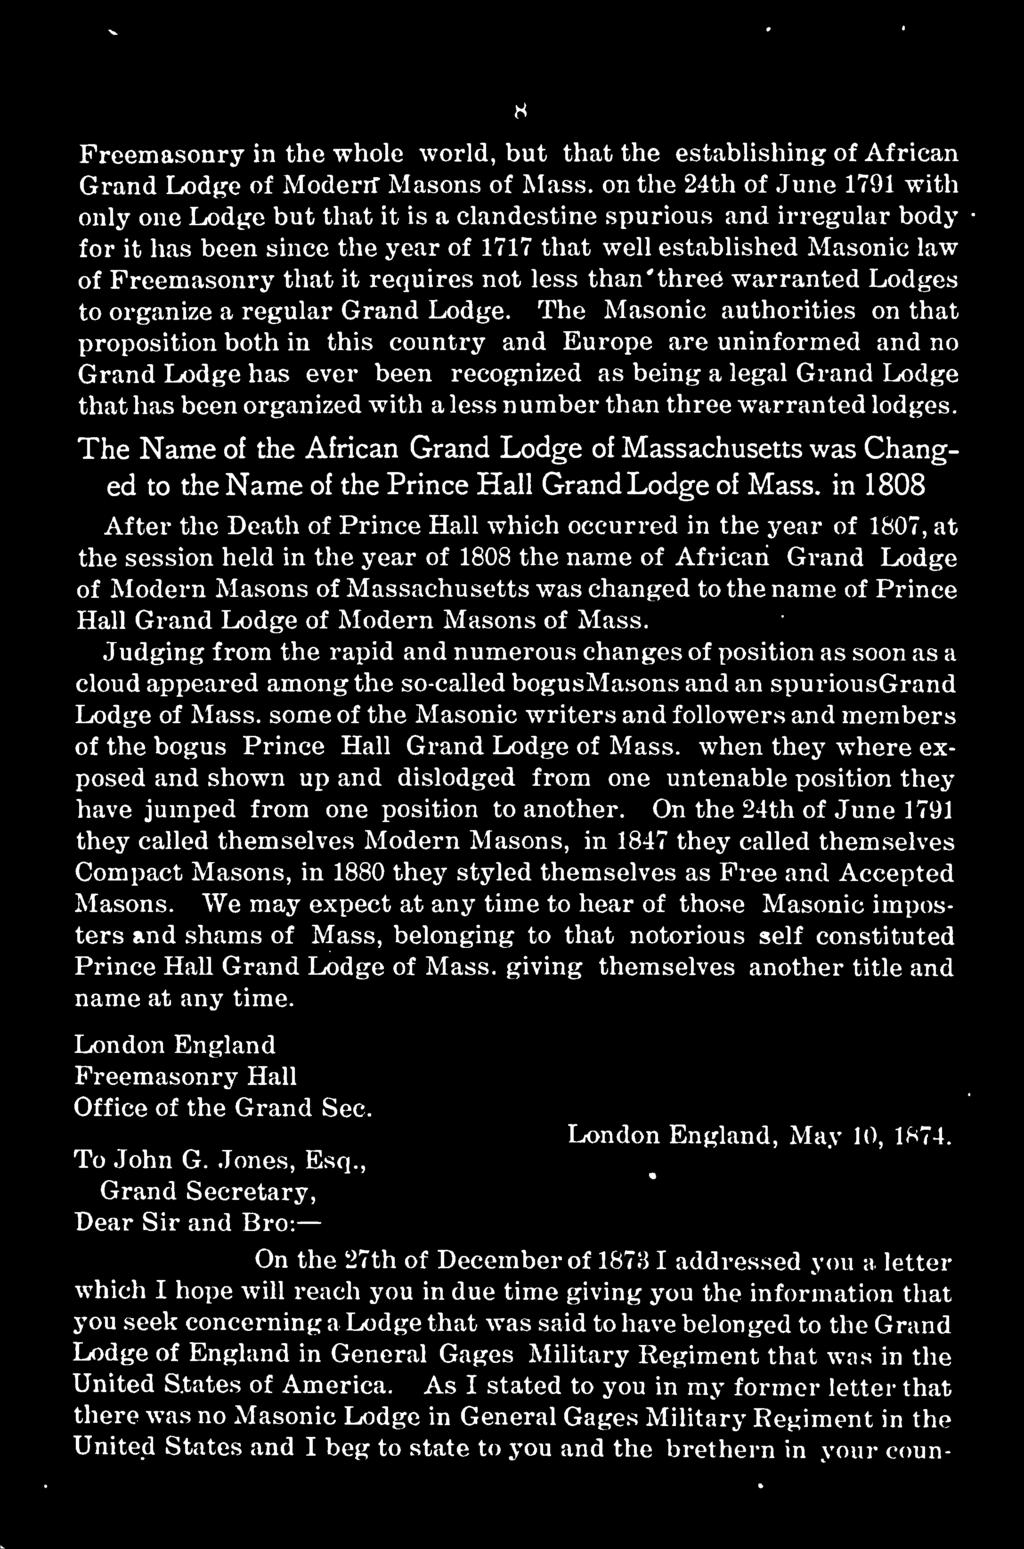 number than three warranted lodges. The Name of the African Grand Lodge of Massachusetts was Changed to the Name of the Prince Hall Grand Lodge of Mass.